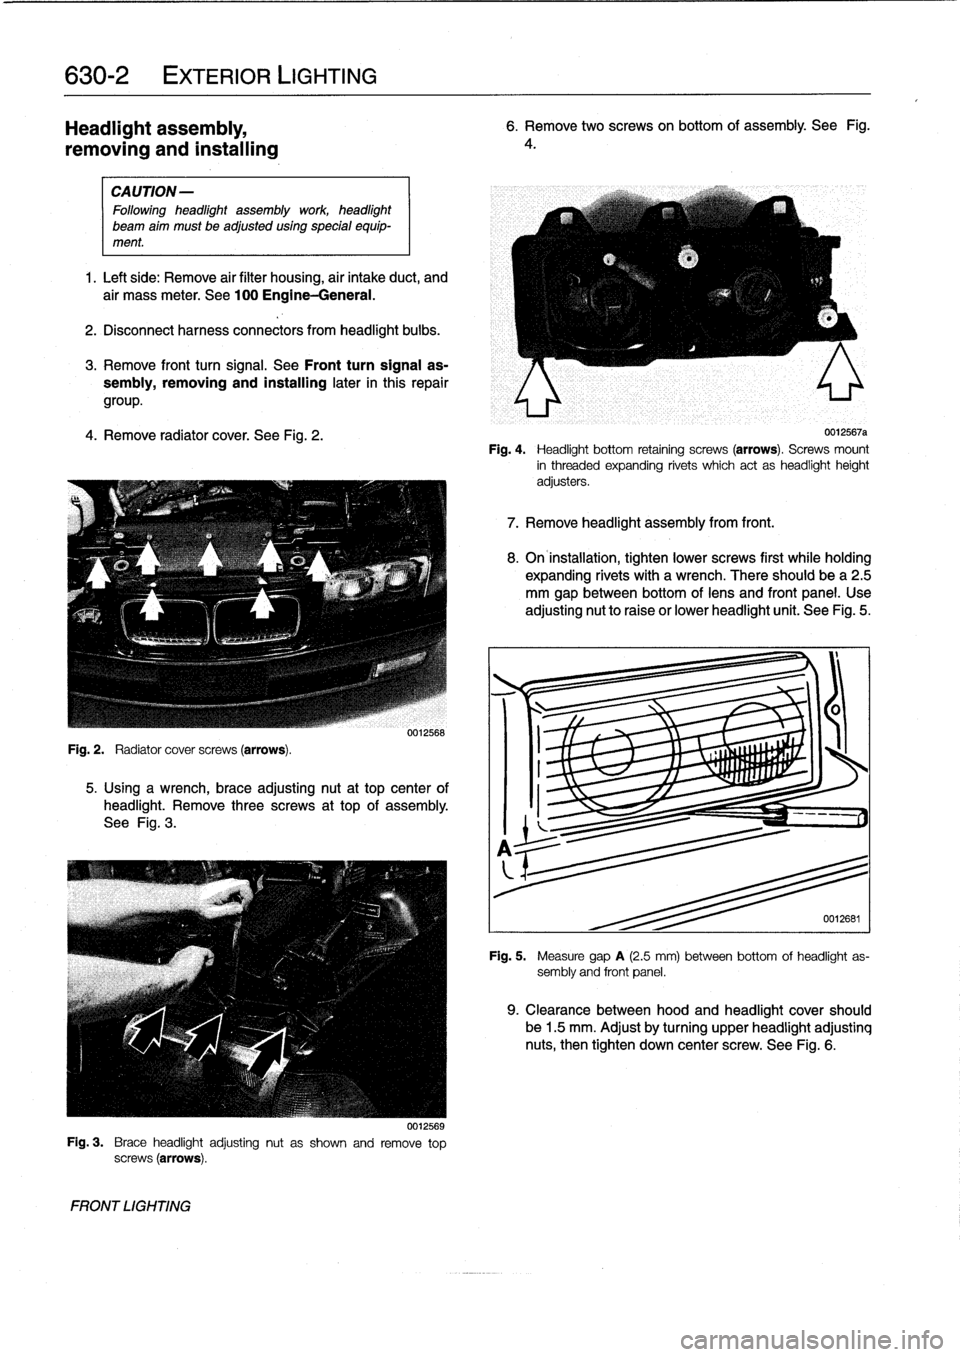 BMW 318i 1995 E36 Workshop Manual 
630-2

	

EXTERIOR
LIGHTING

Headlight
assembly,

removing
and
installing

CAUTION-

Followingheadlight
assembly
work
headlight

beam
aim
must
be
adjusted
using
special
equip-
ment
.

1
.
Left
side
: